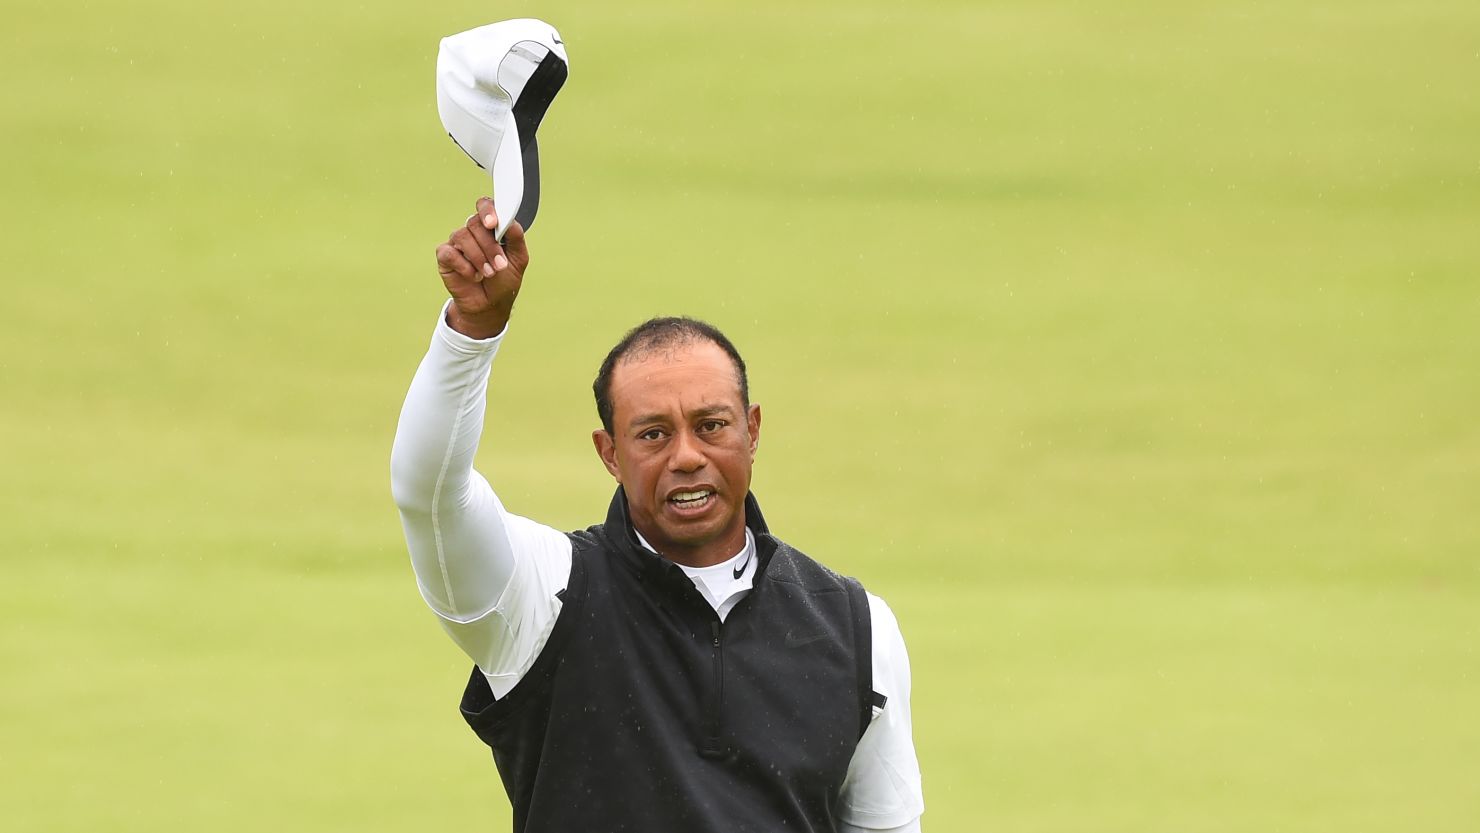 Tiger Woods missed the cut in the Open Championship at Royal Portrush.